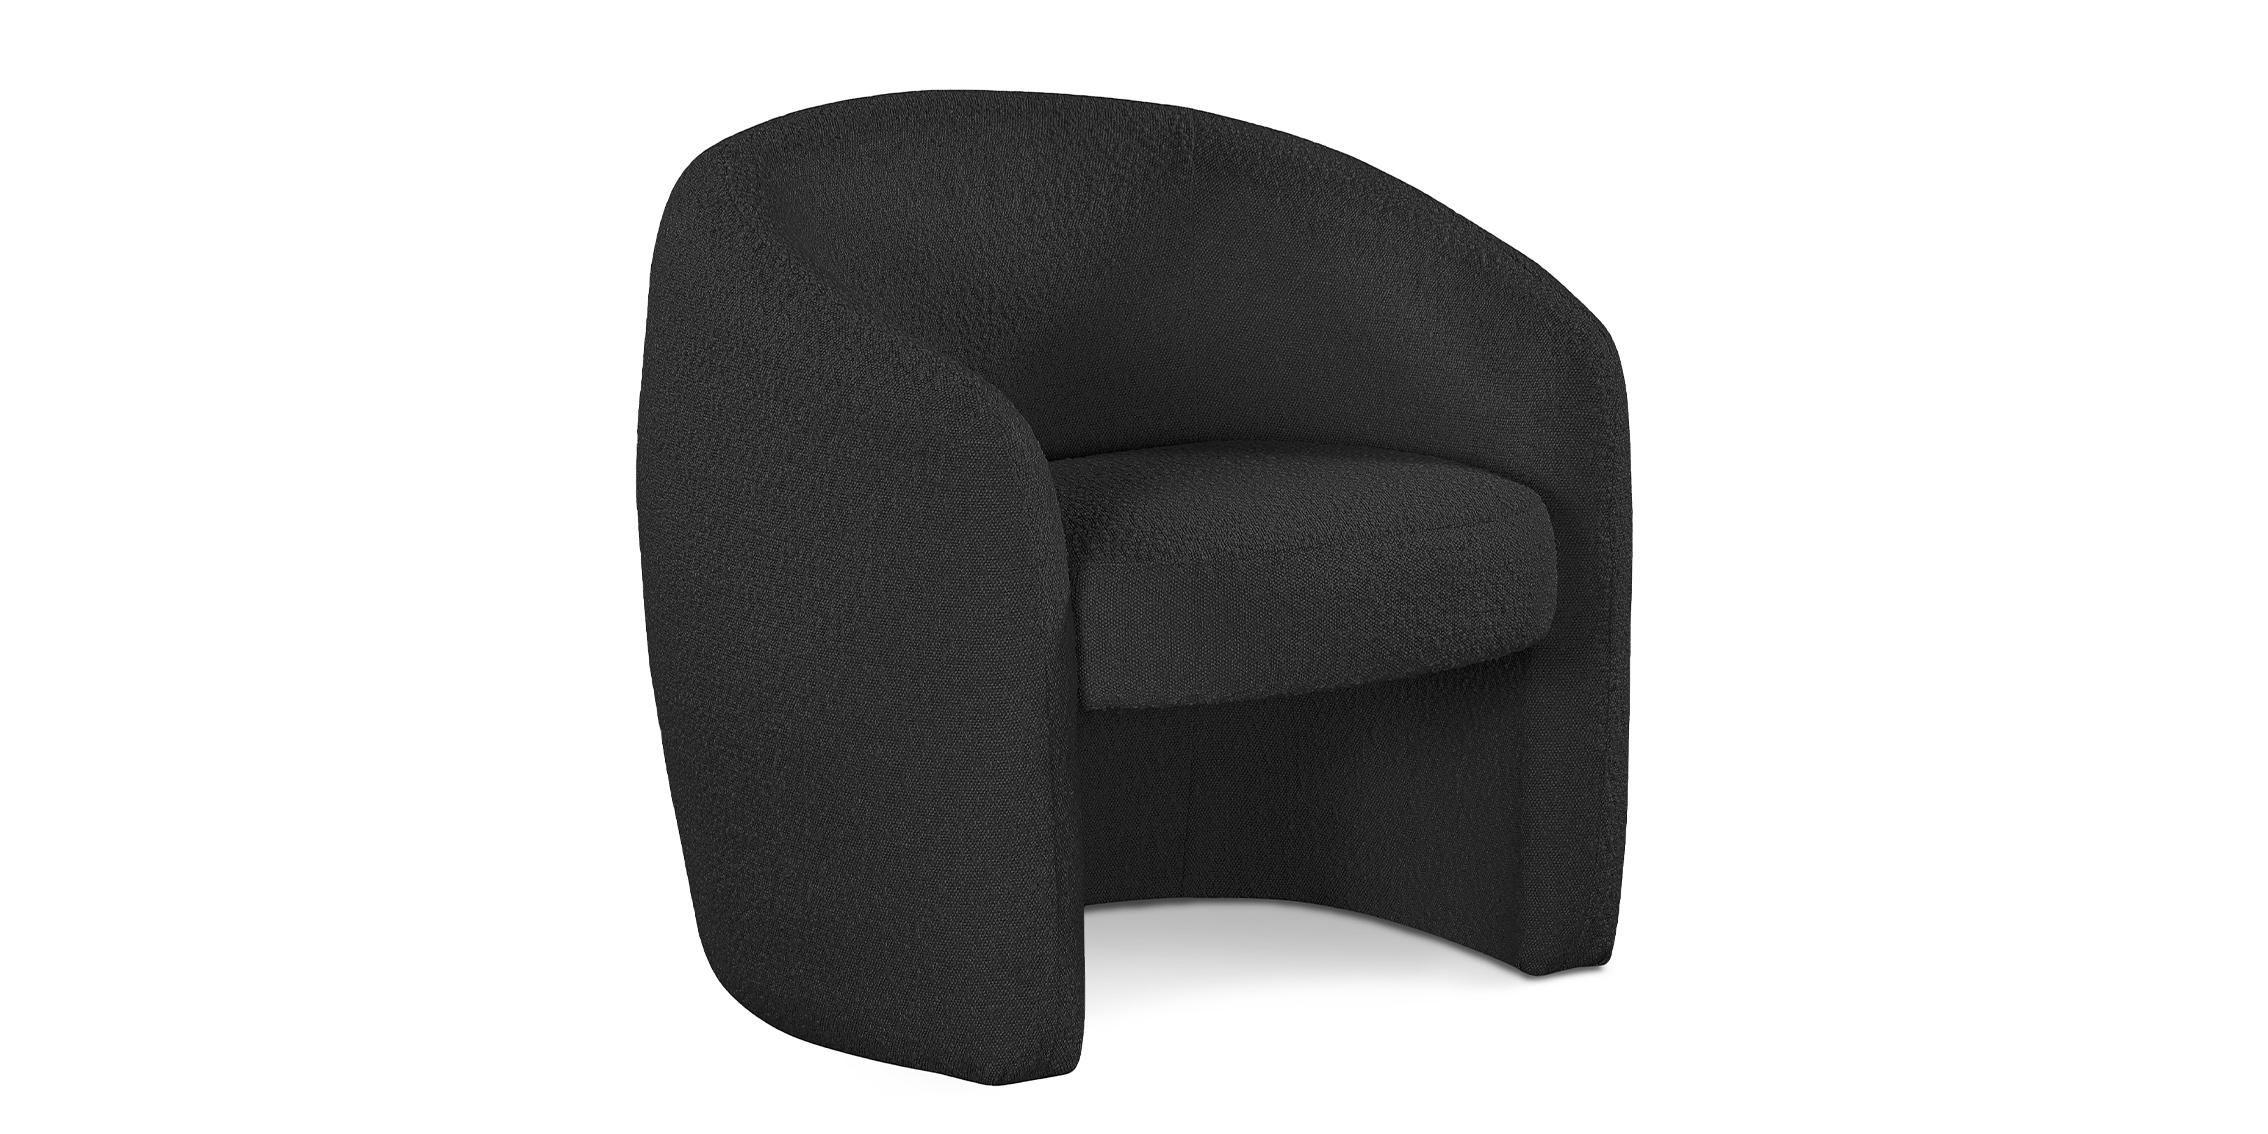 Contemporary, Modern Accent Chair ACADIA 543Black 543Black in Black 